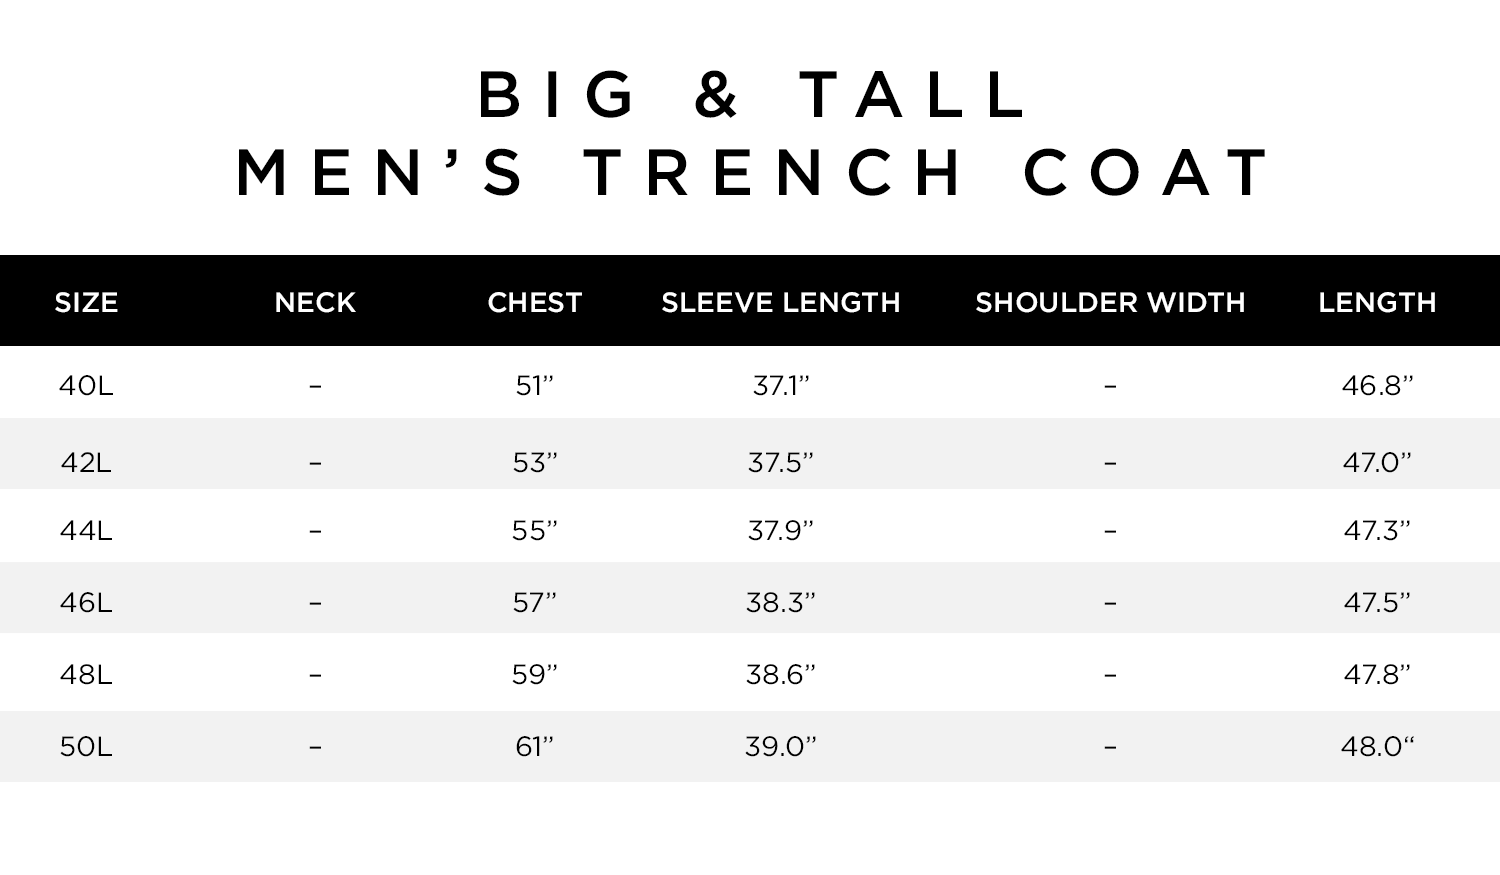 Big and Tall Men's Trench Coat Size Chart